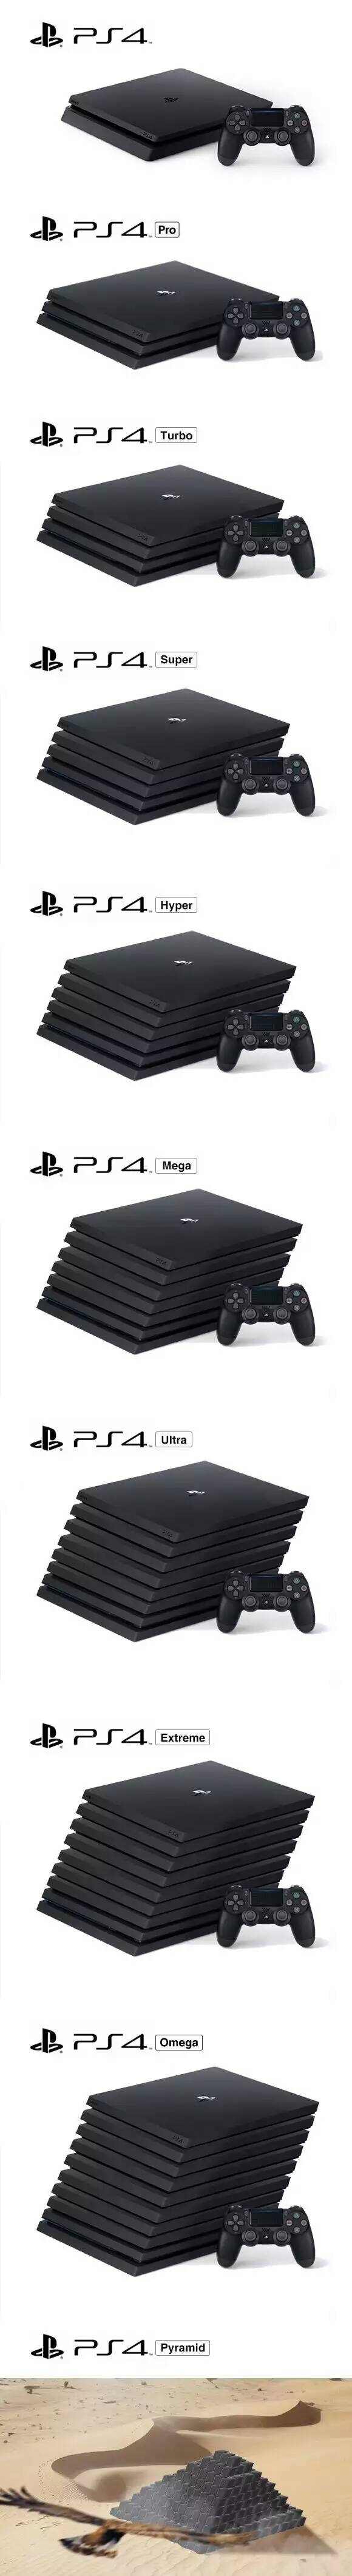 ps4유출.png